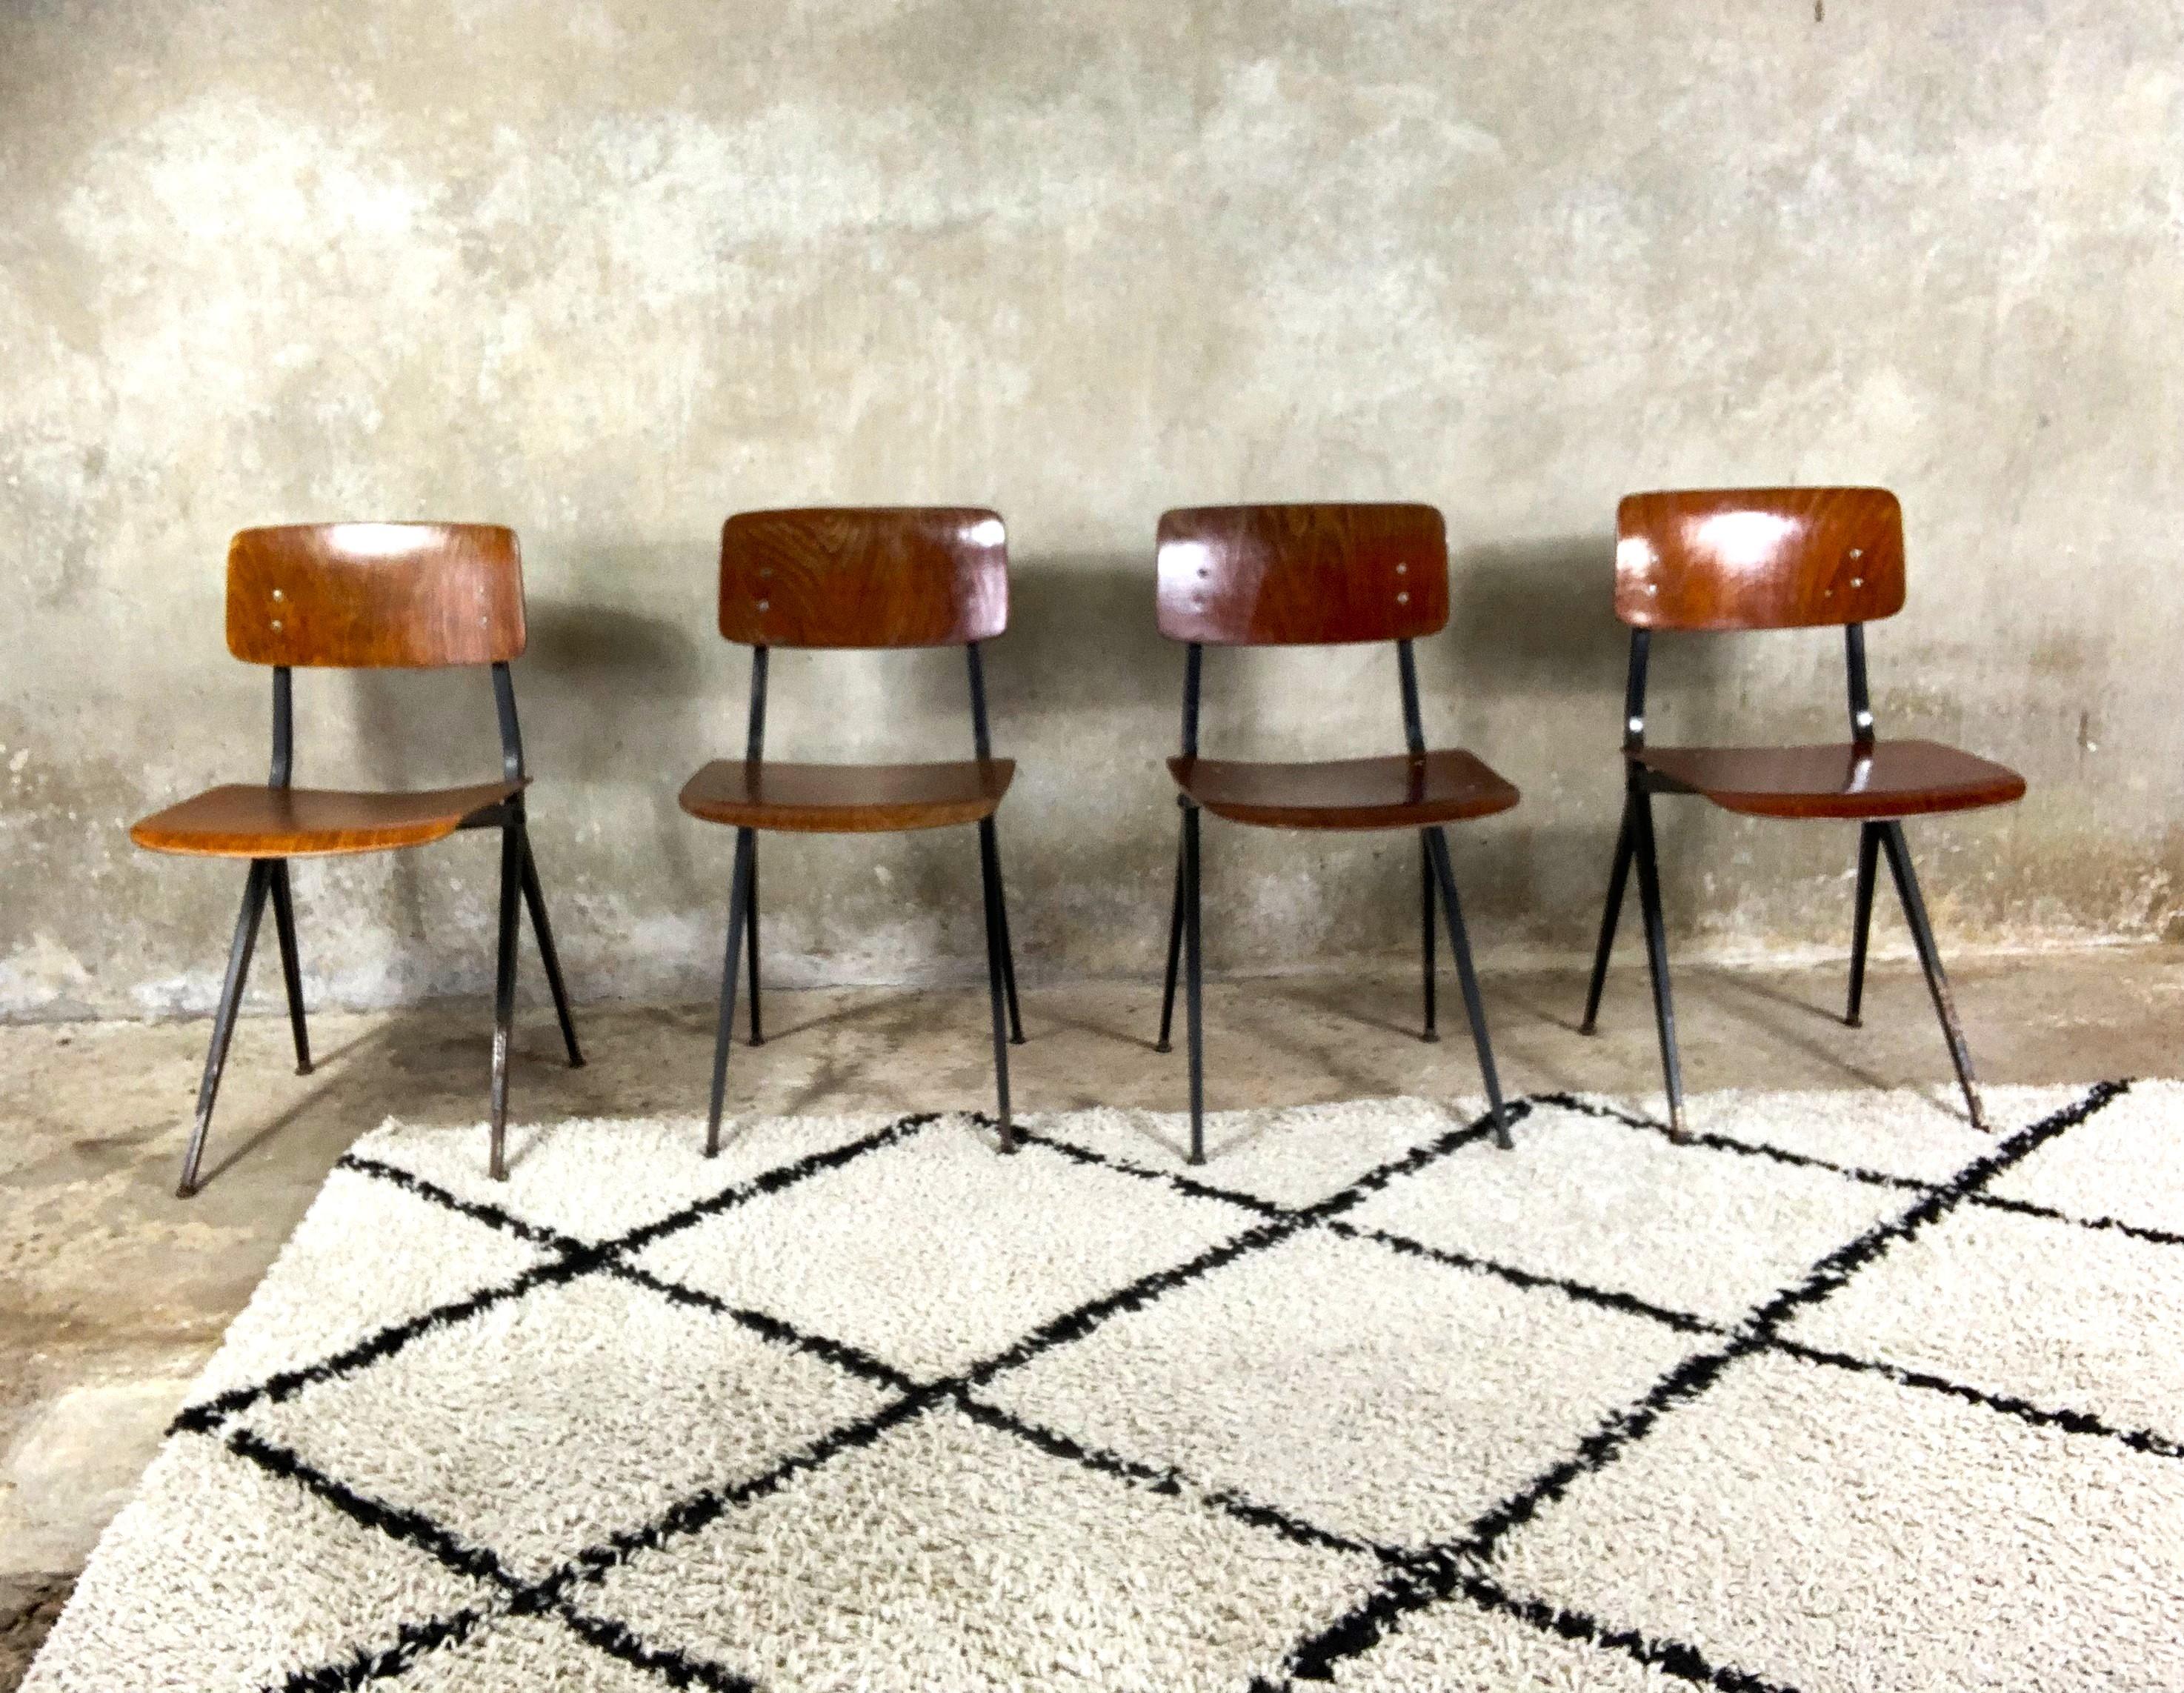 Chairs designed by Ynske Kooistra for Marko Holland for Dutch schools in the 1960s. Those chairs have very stable structure and elements that are resistant to destruction. The arrangement of the legs gives the whole thing a strong character and